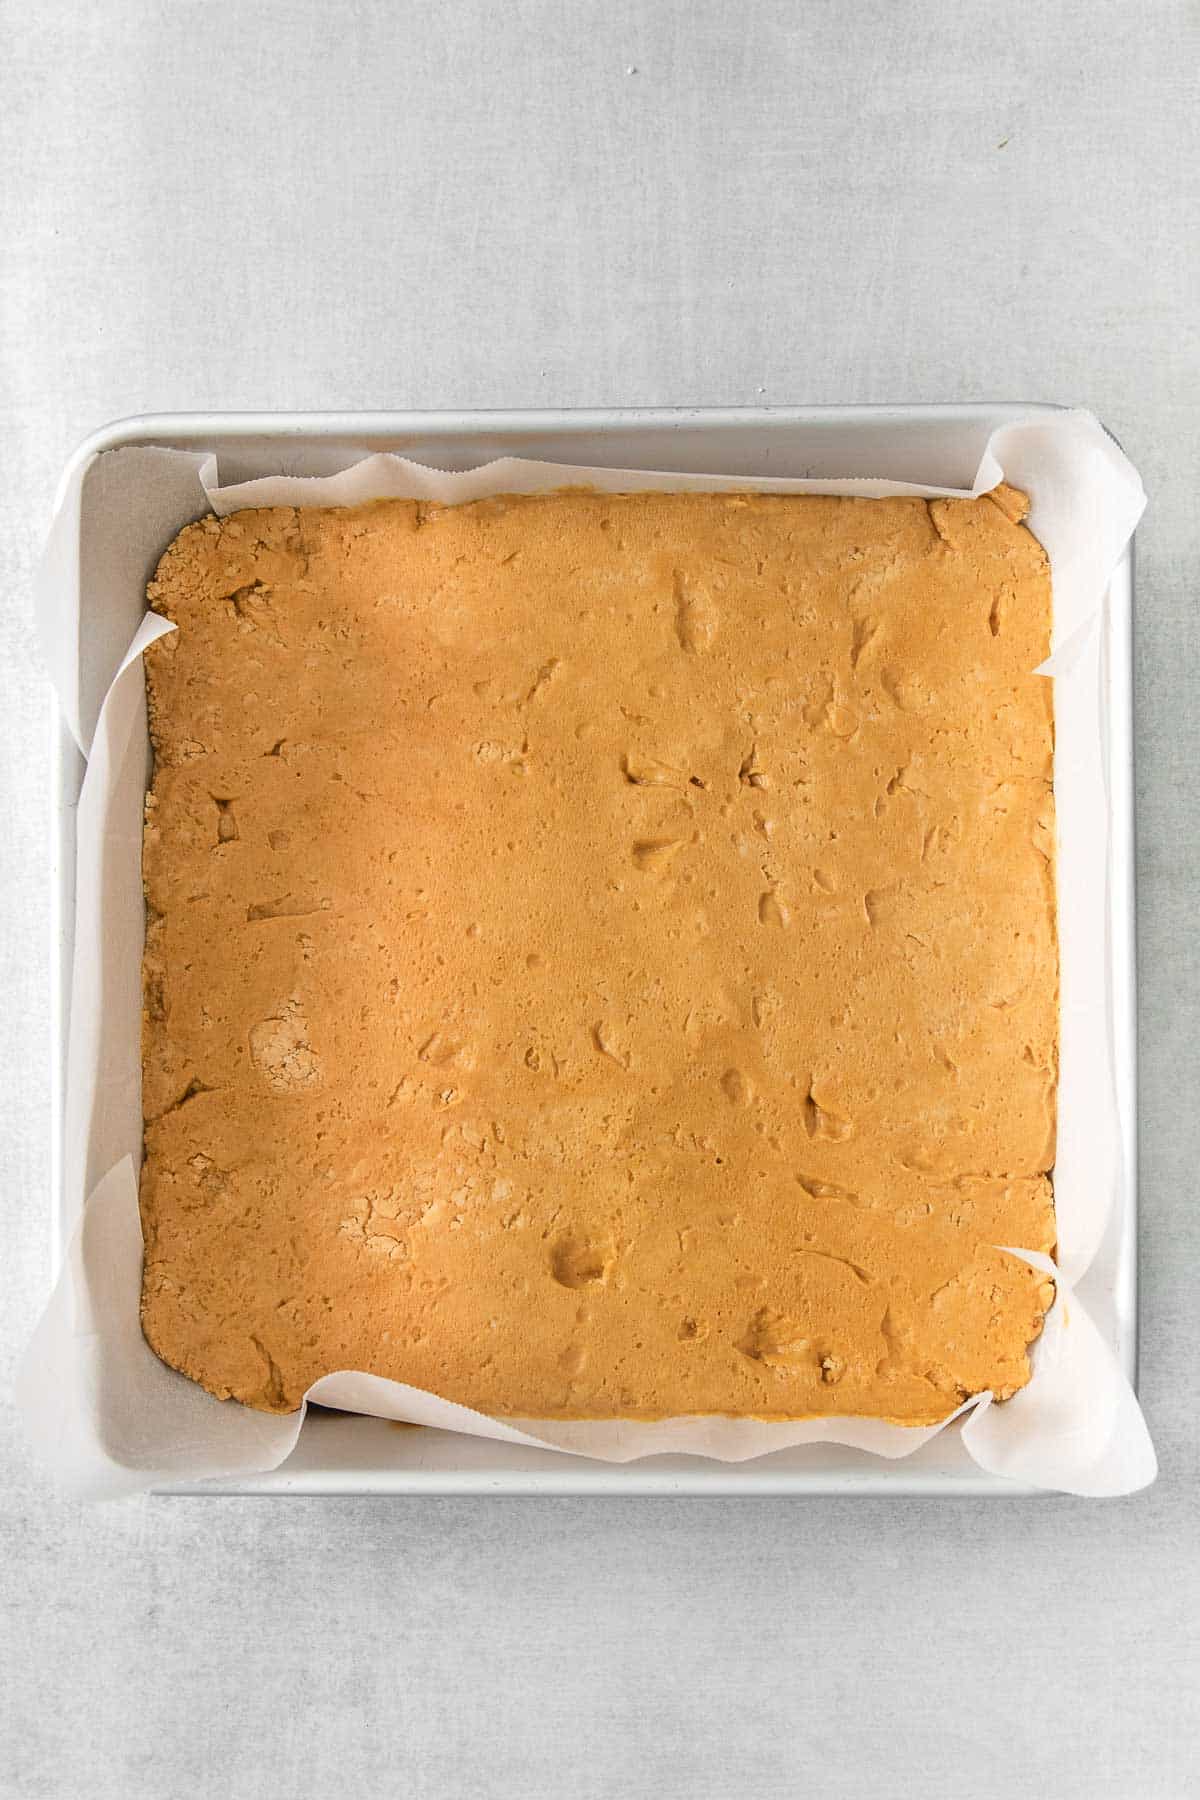 peanut butter and powdered sugar mixture pressed into a square metal baking dish.